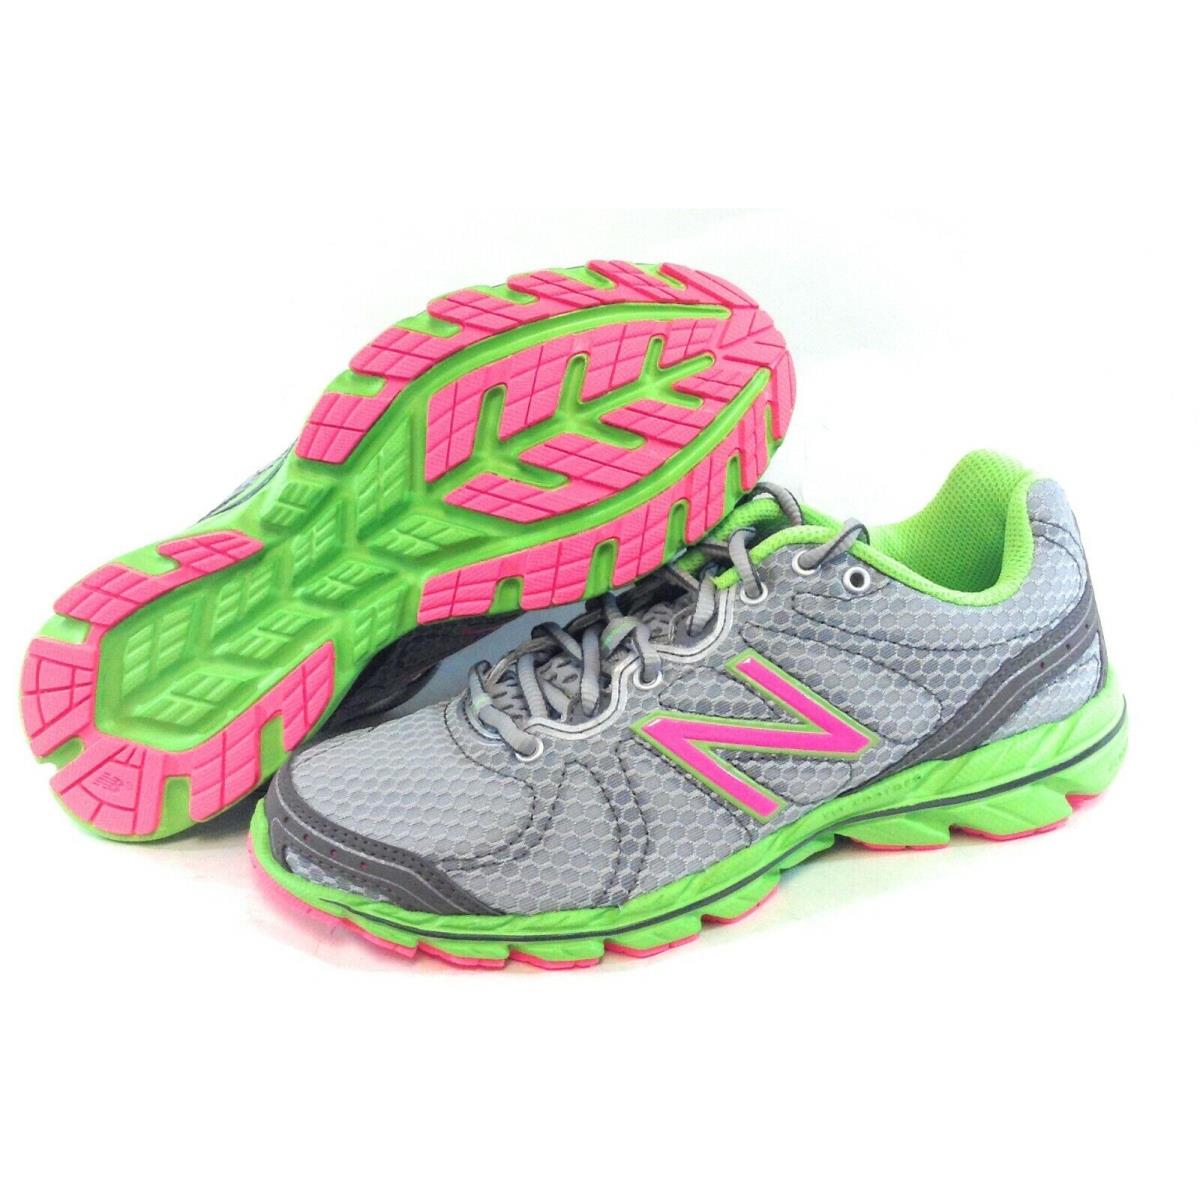 Womens New Balance 590 SG2 Silver Lime Green Pink Running Sneakers Shoes